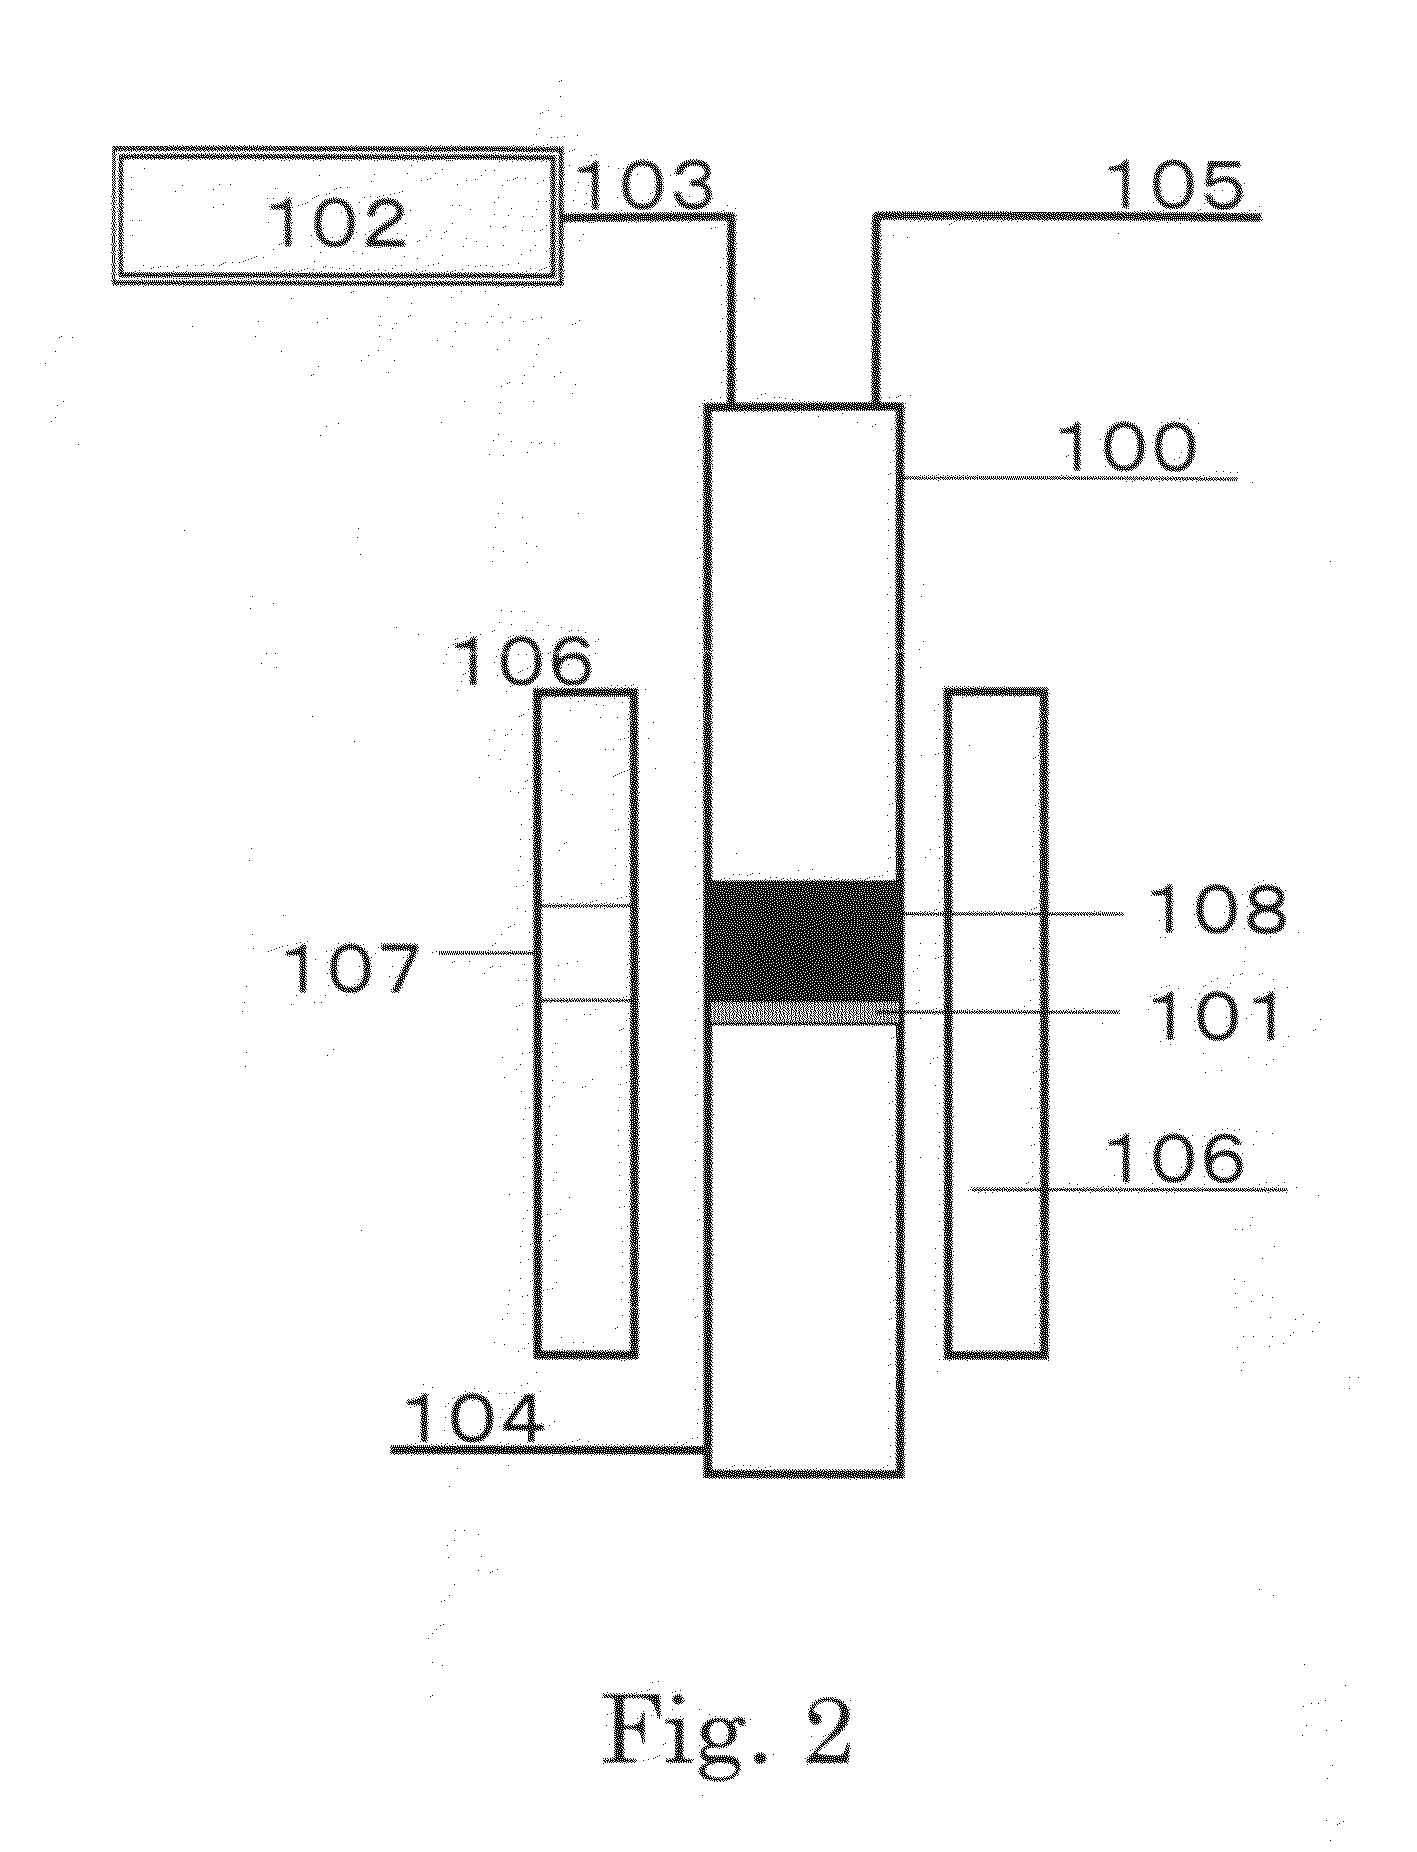 Carbon nanotube assembly and electrically conductive film